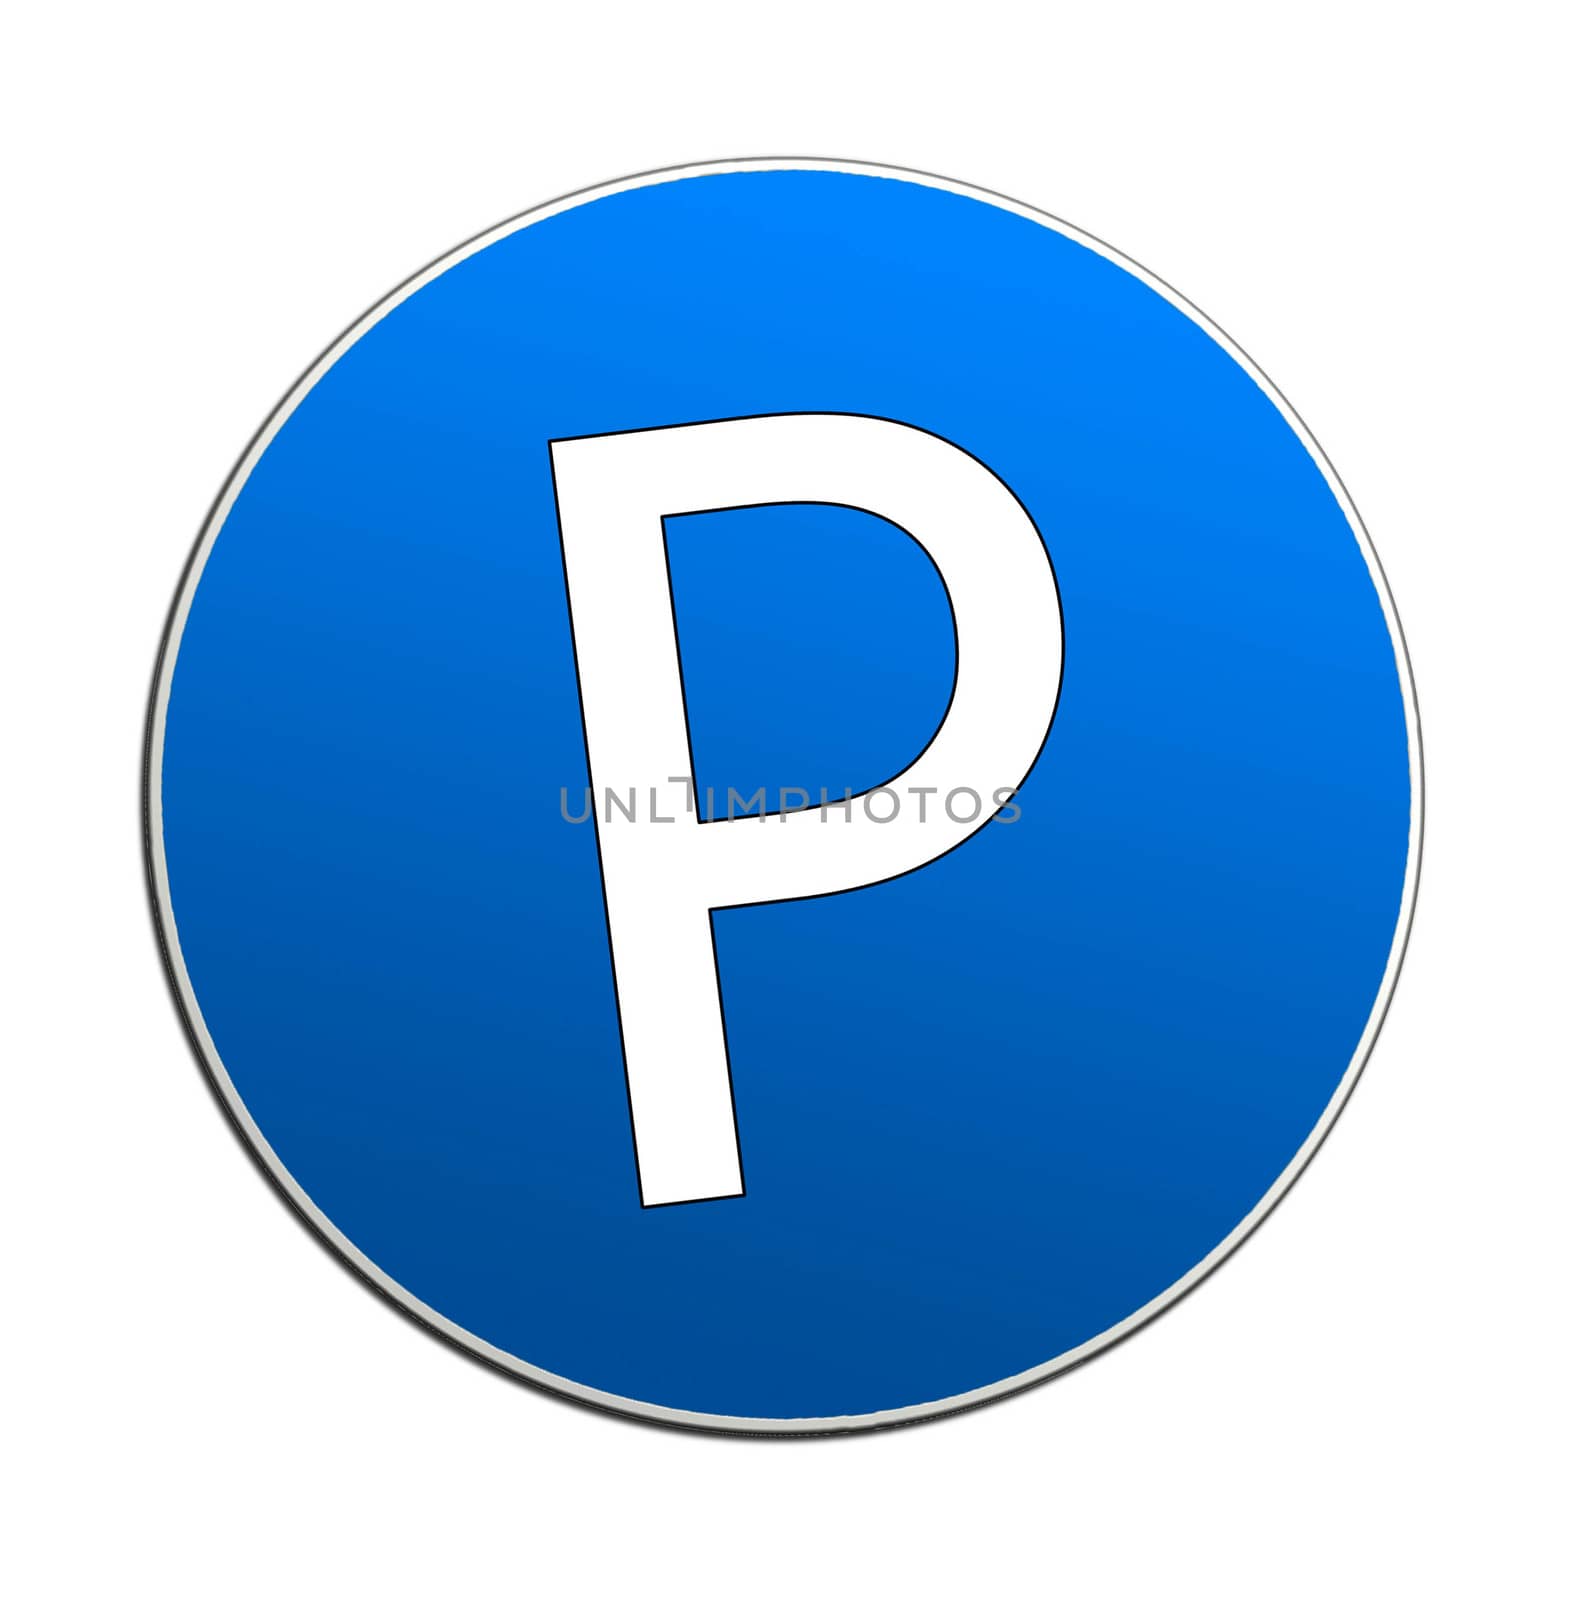 Illustration of cars parking sign by shutswis